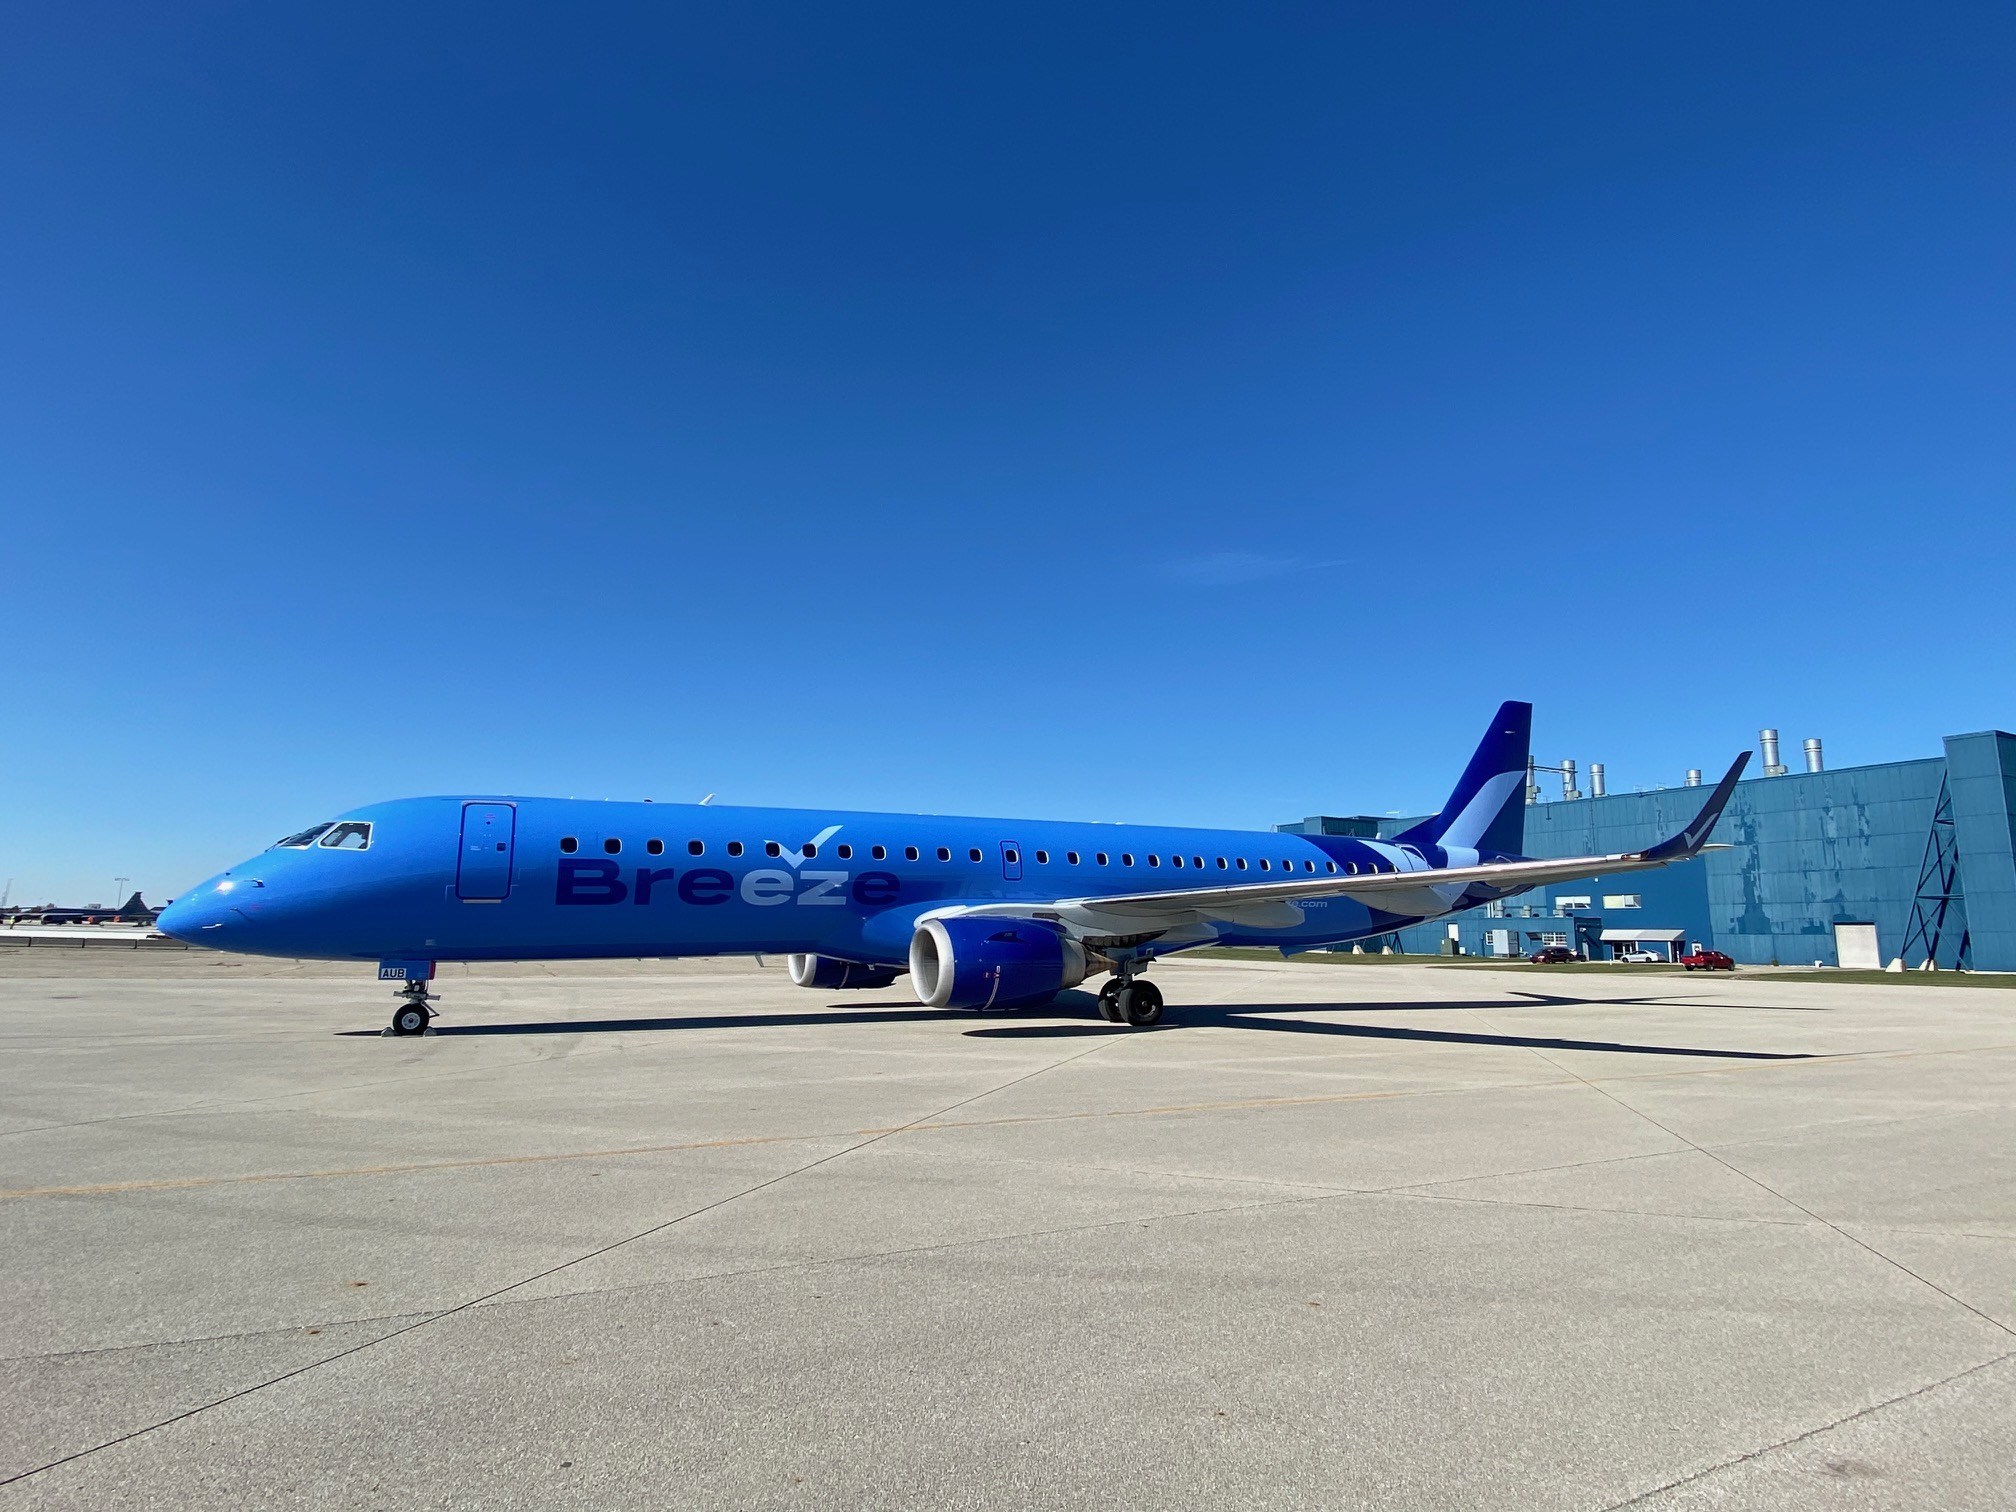 Breeze Airways announces debut service from 16 U.S. cities - Skies Mag